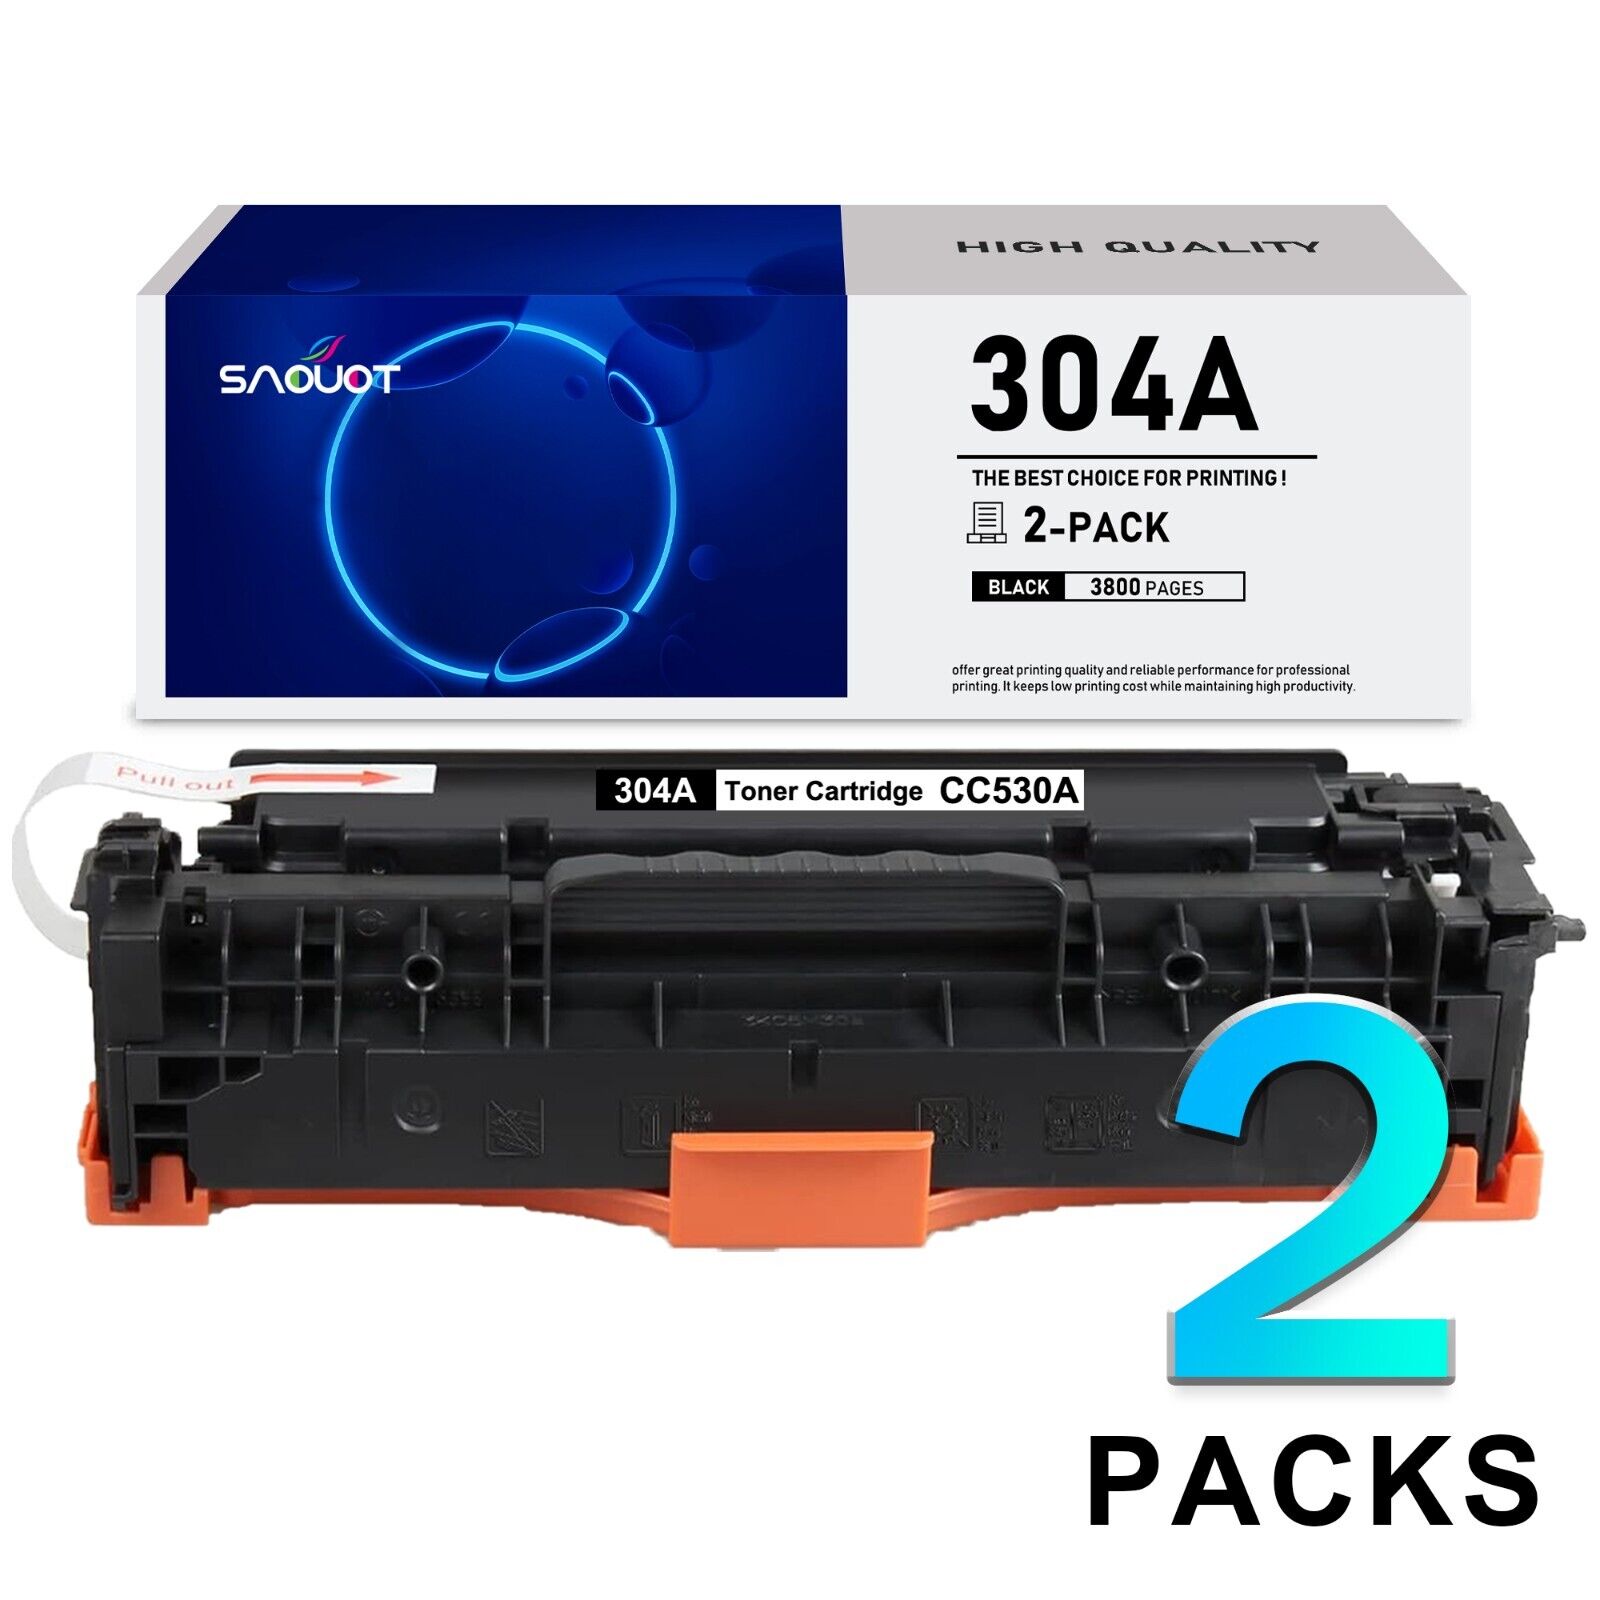 304A Toner Cartridges Replacement for HP 304A Color CP2025 CM2320fxi MFP CP2025n